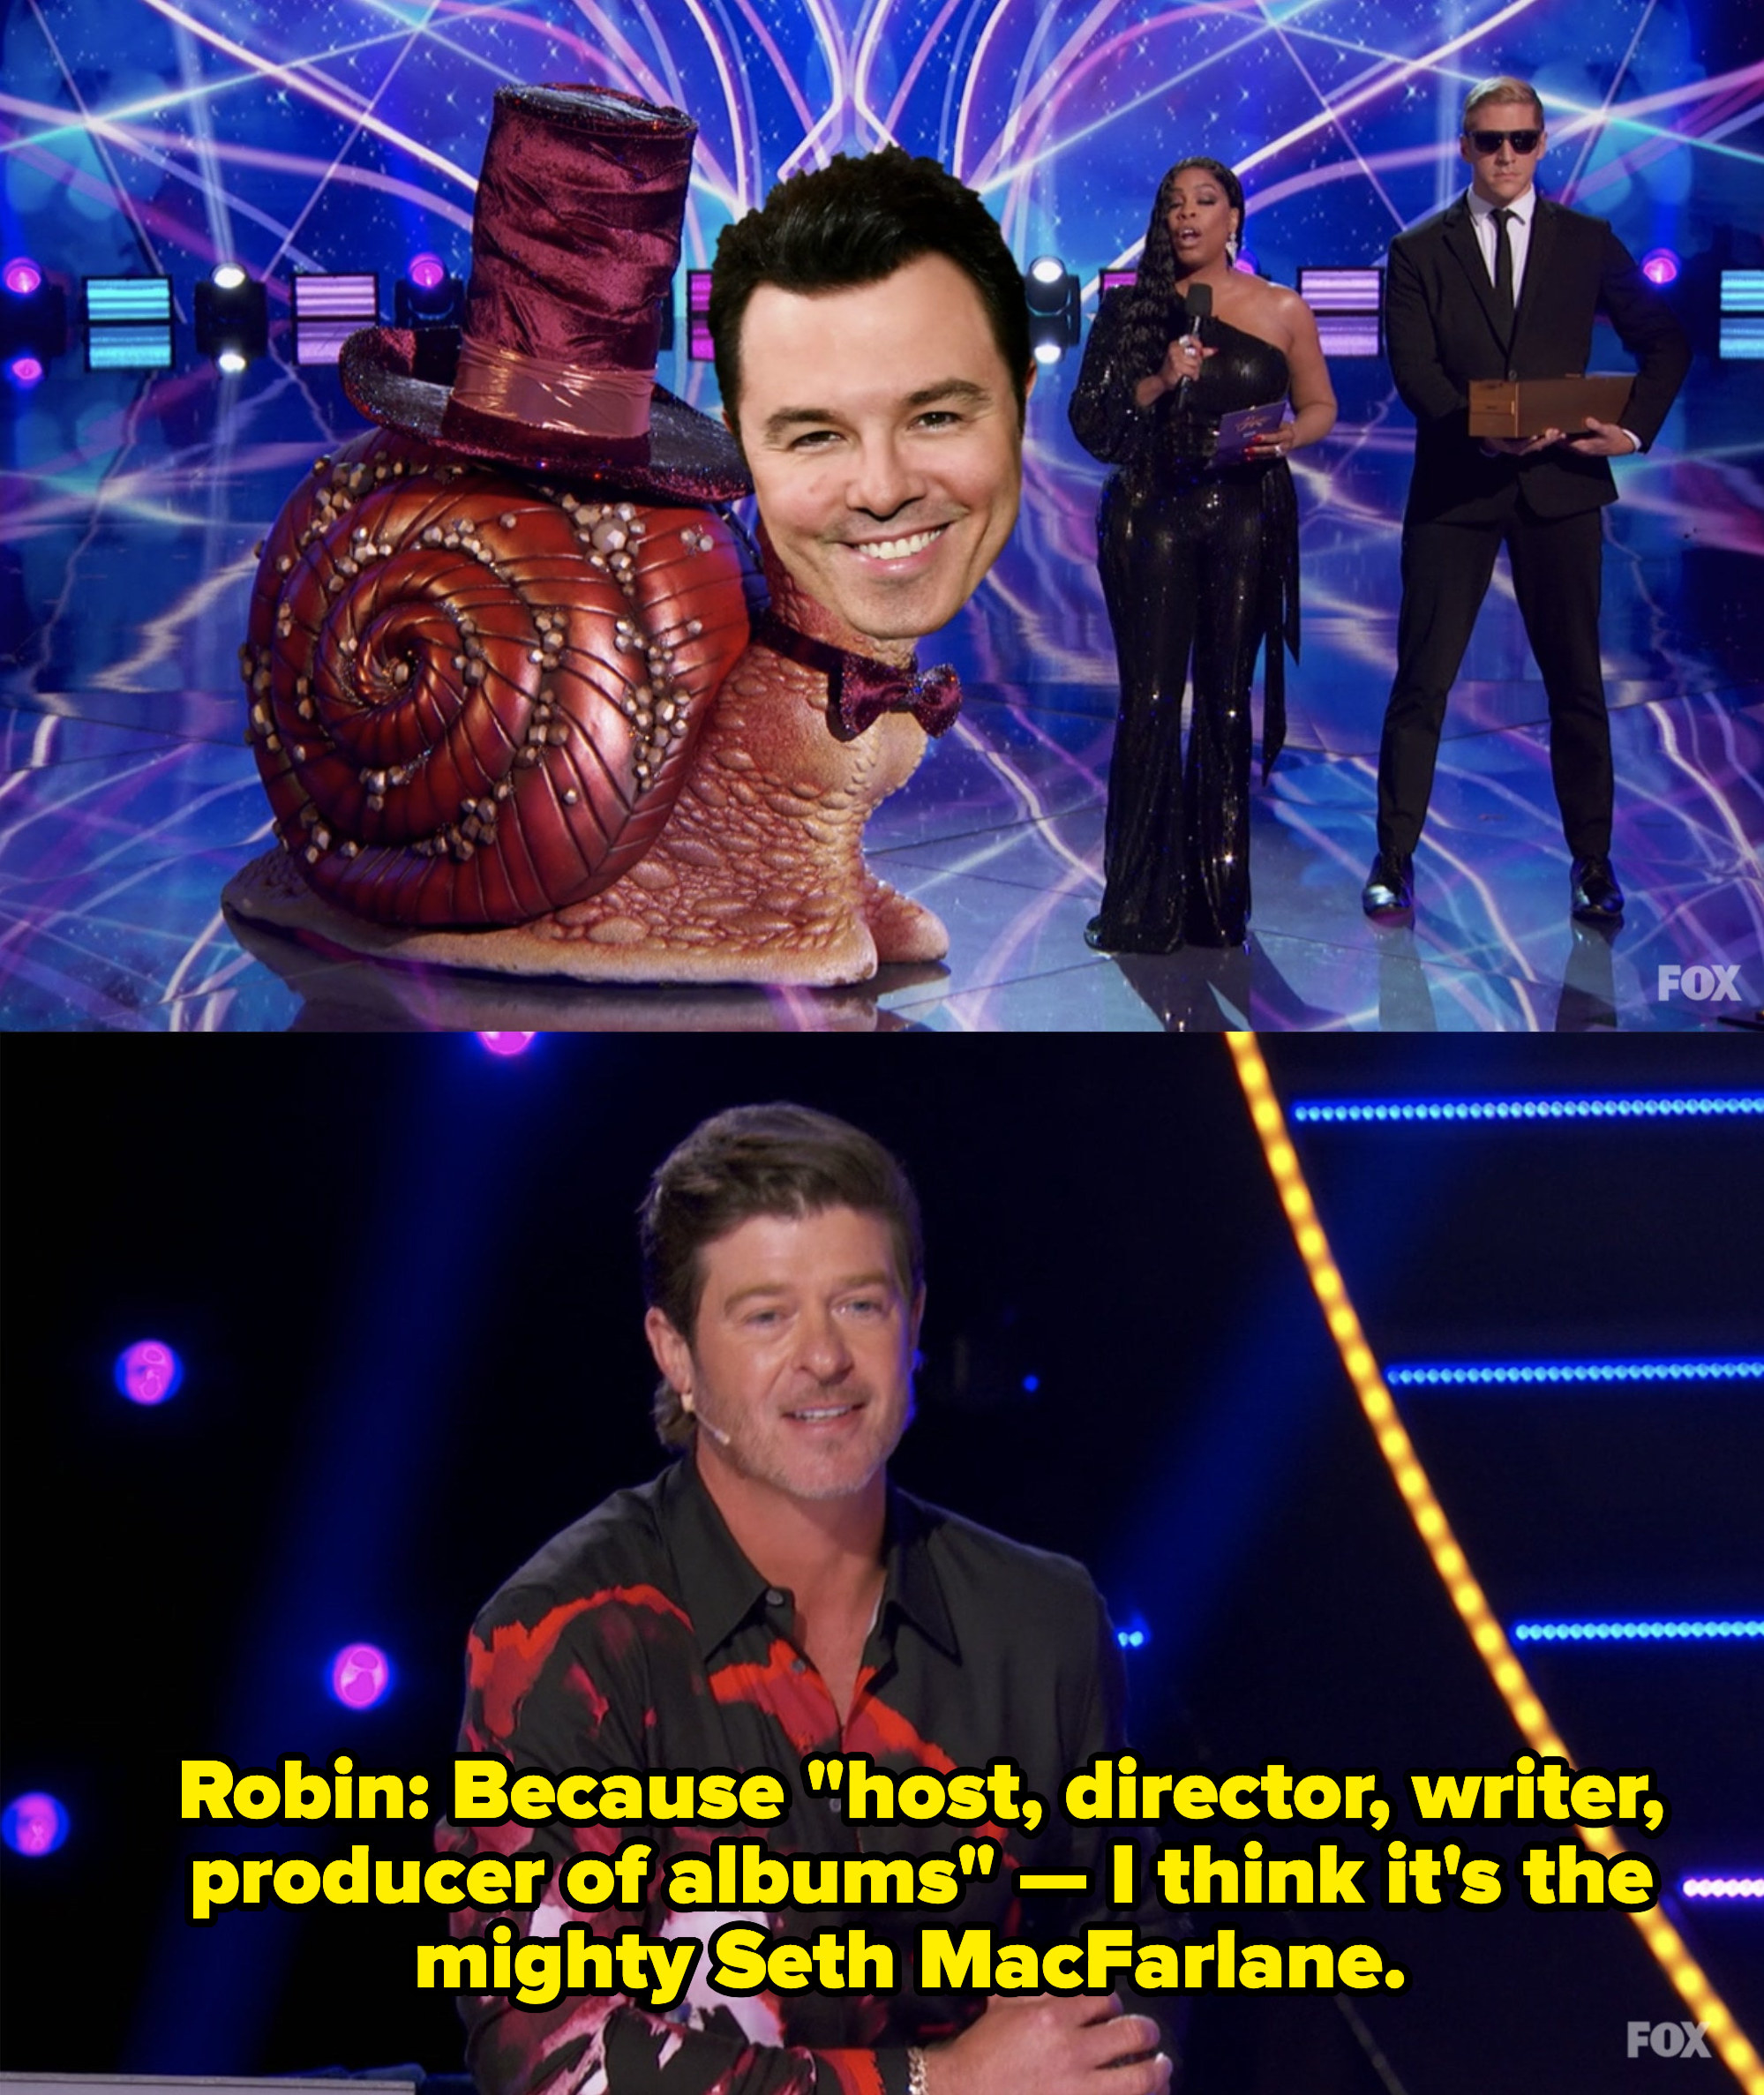 Robin says, &quot;Because host, director, writer, producer of albums - I think it&#x27;s the mighty Seth MacFarlane&quot;